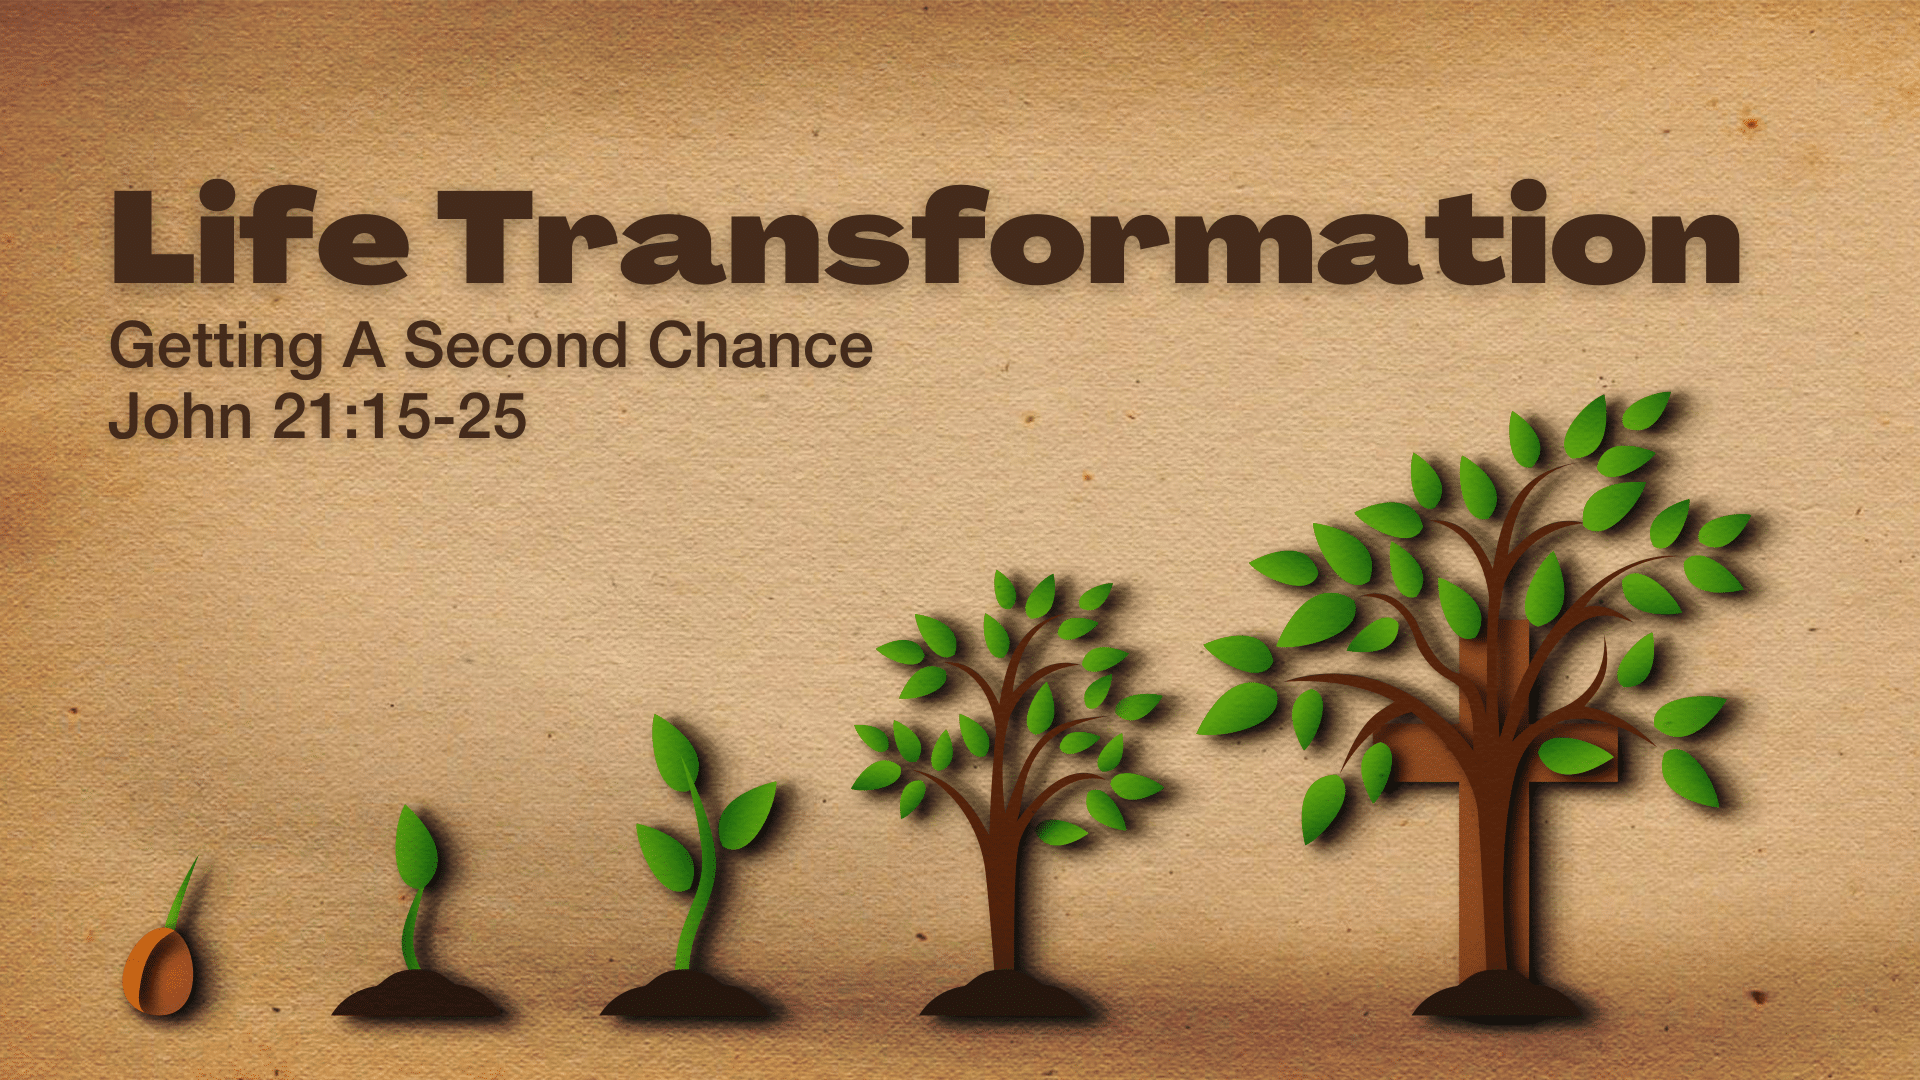 Life Transformation: Getting A Second Chance